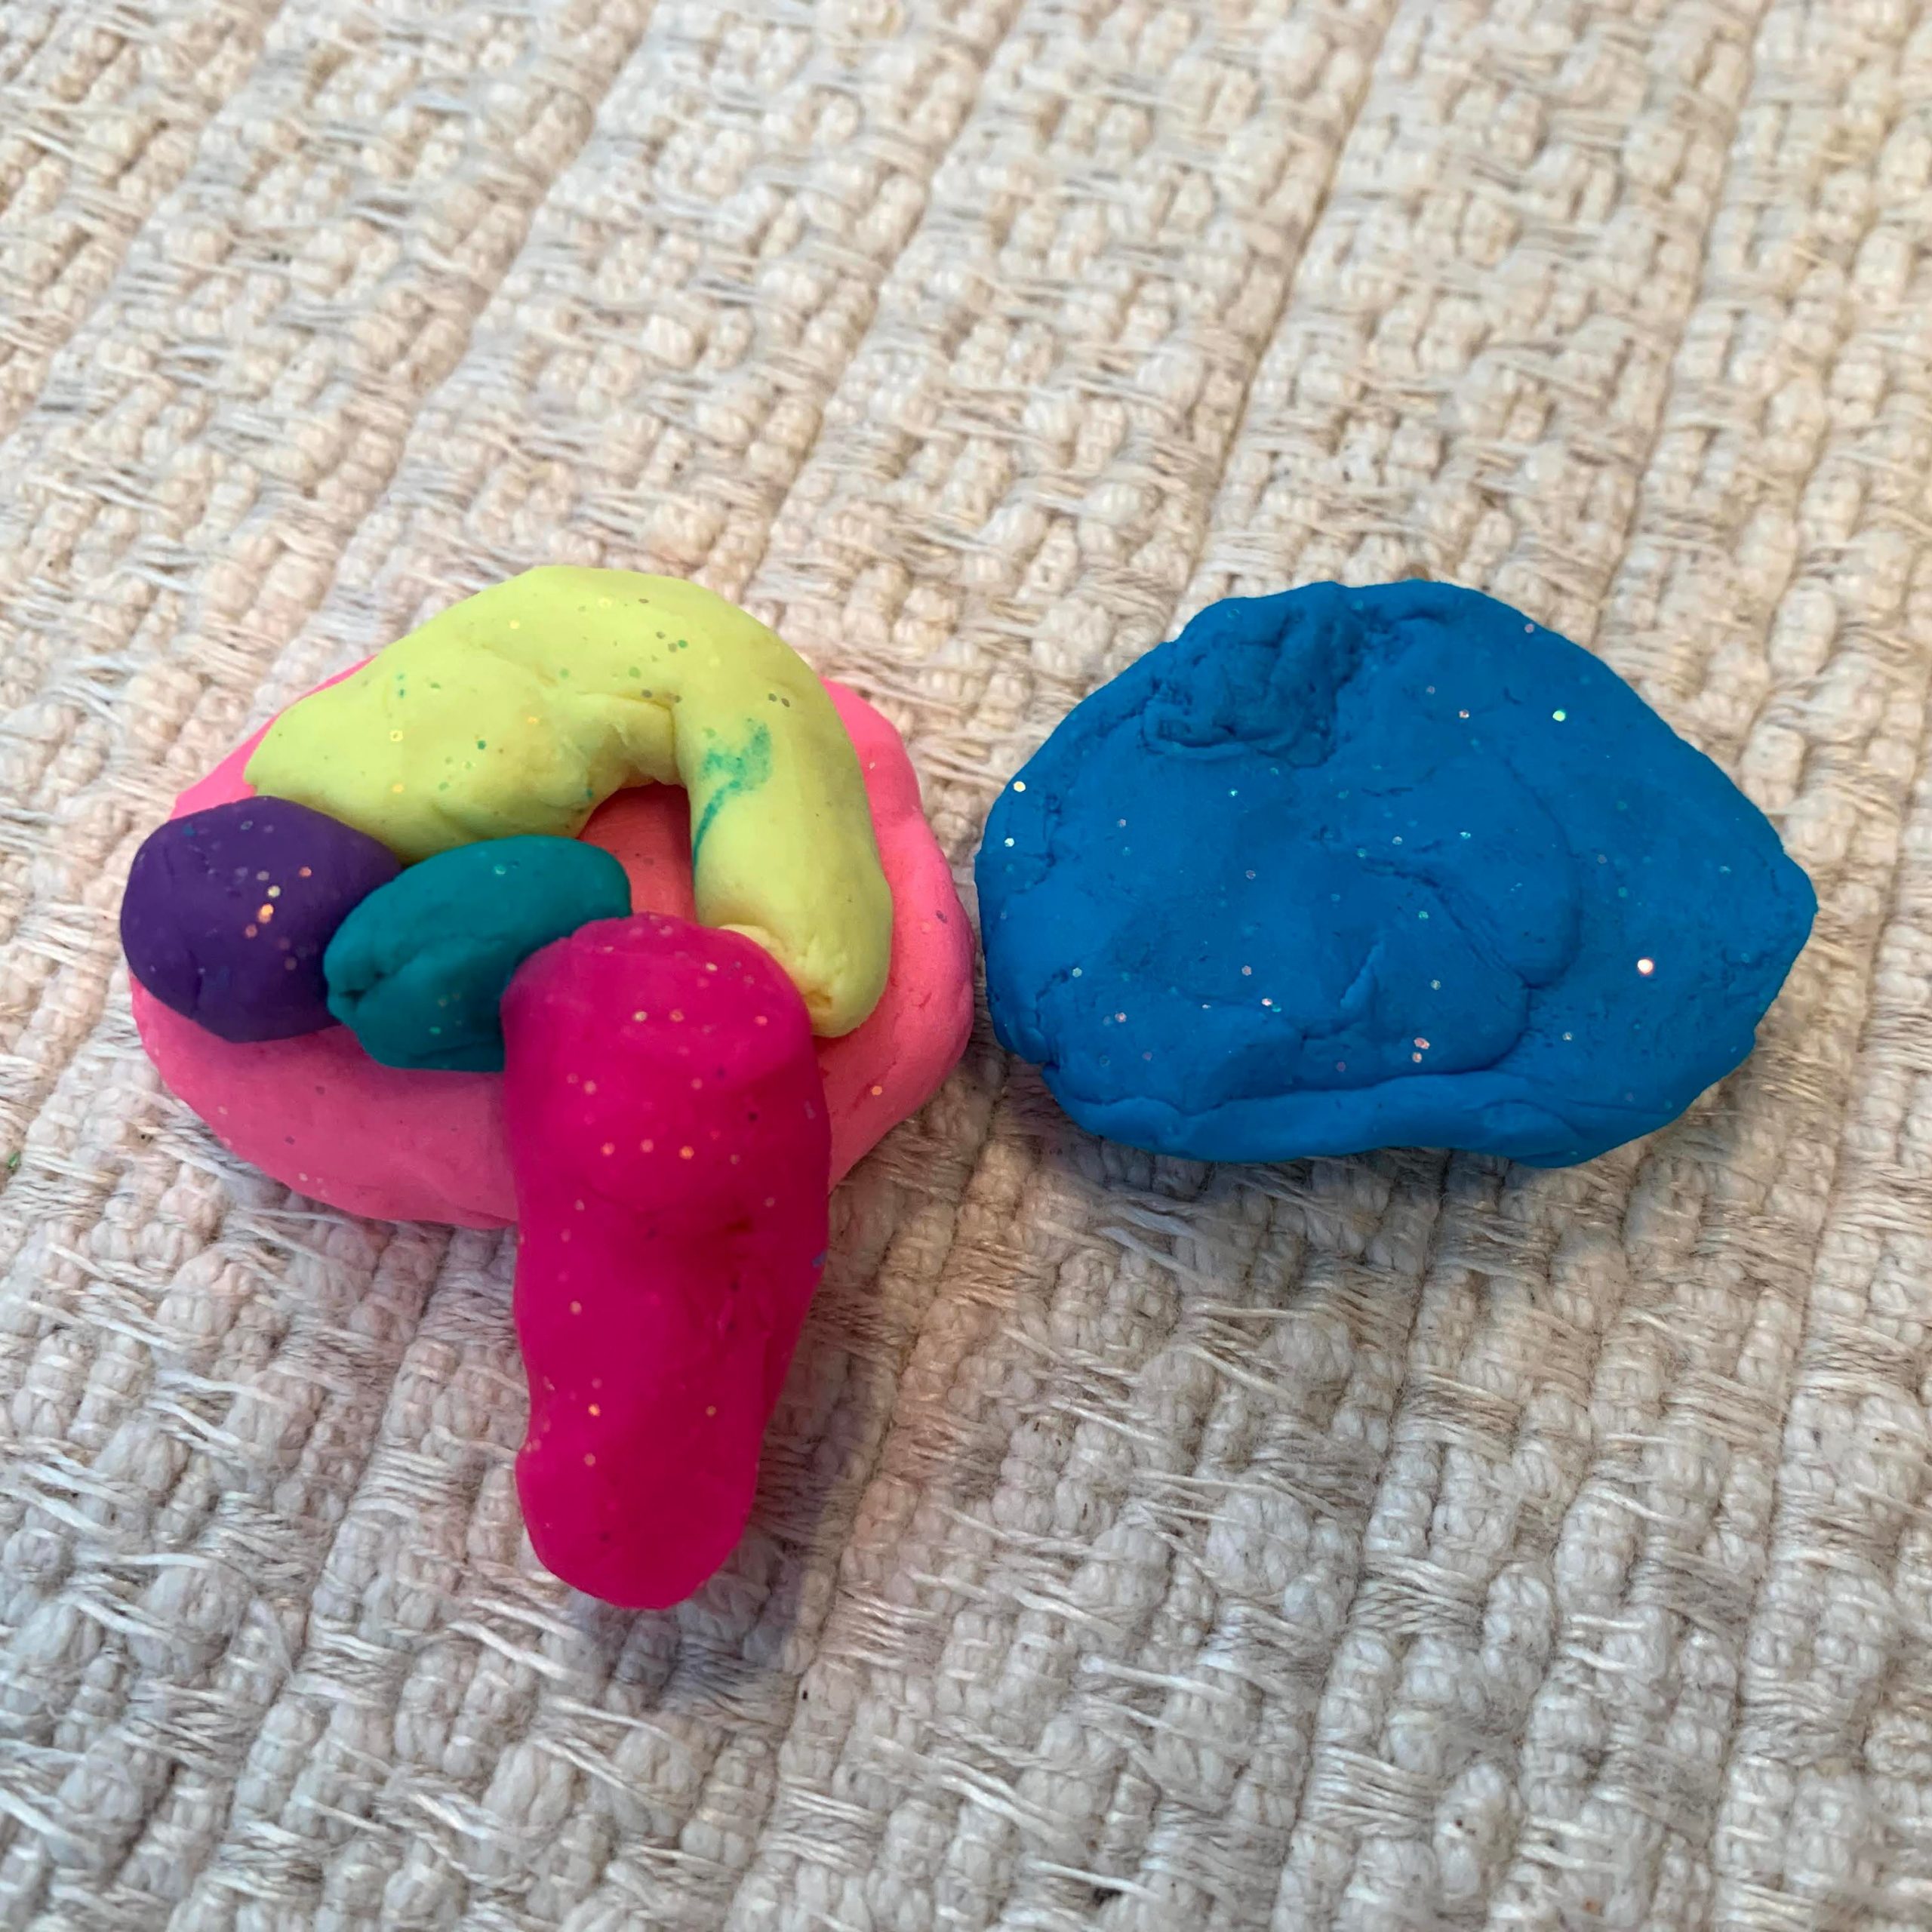 Fumiko Hoeft shows how to construct an almost anatomically correct brain out of playdough